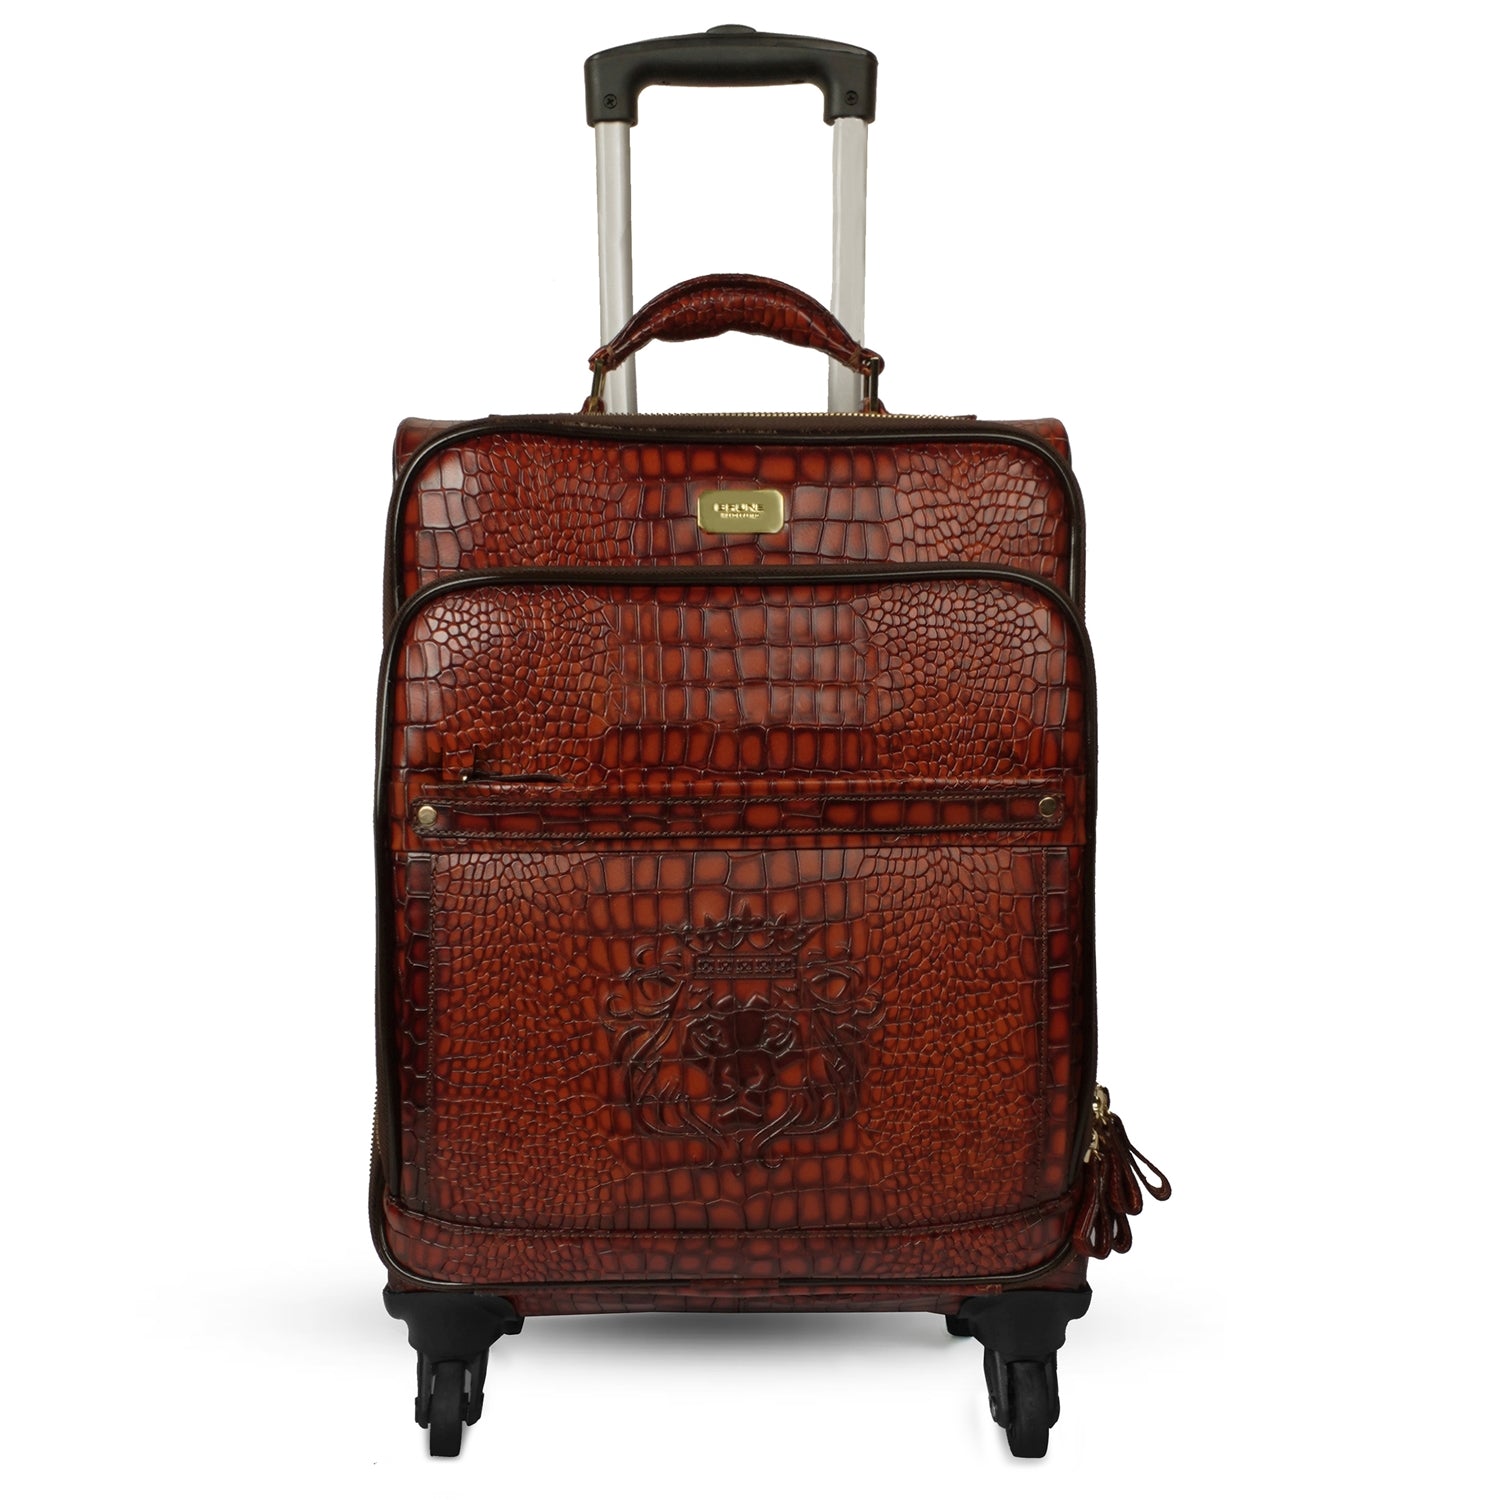 Luggage Strolley Leather Tan Croco Textured with Diamond Stitched Quad Wheel Cabin Bag